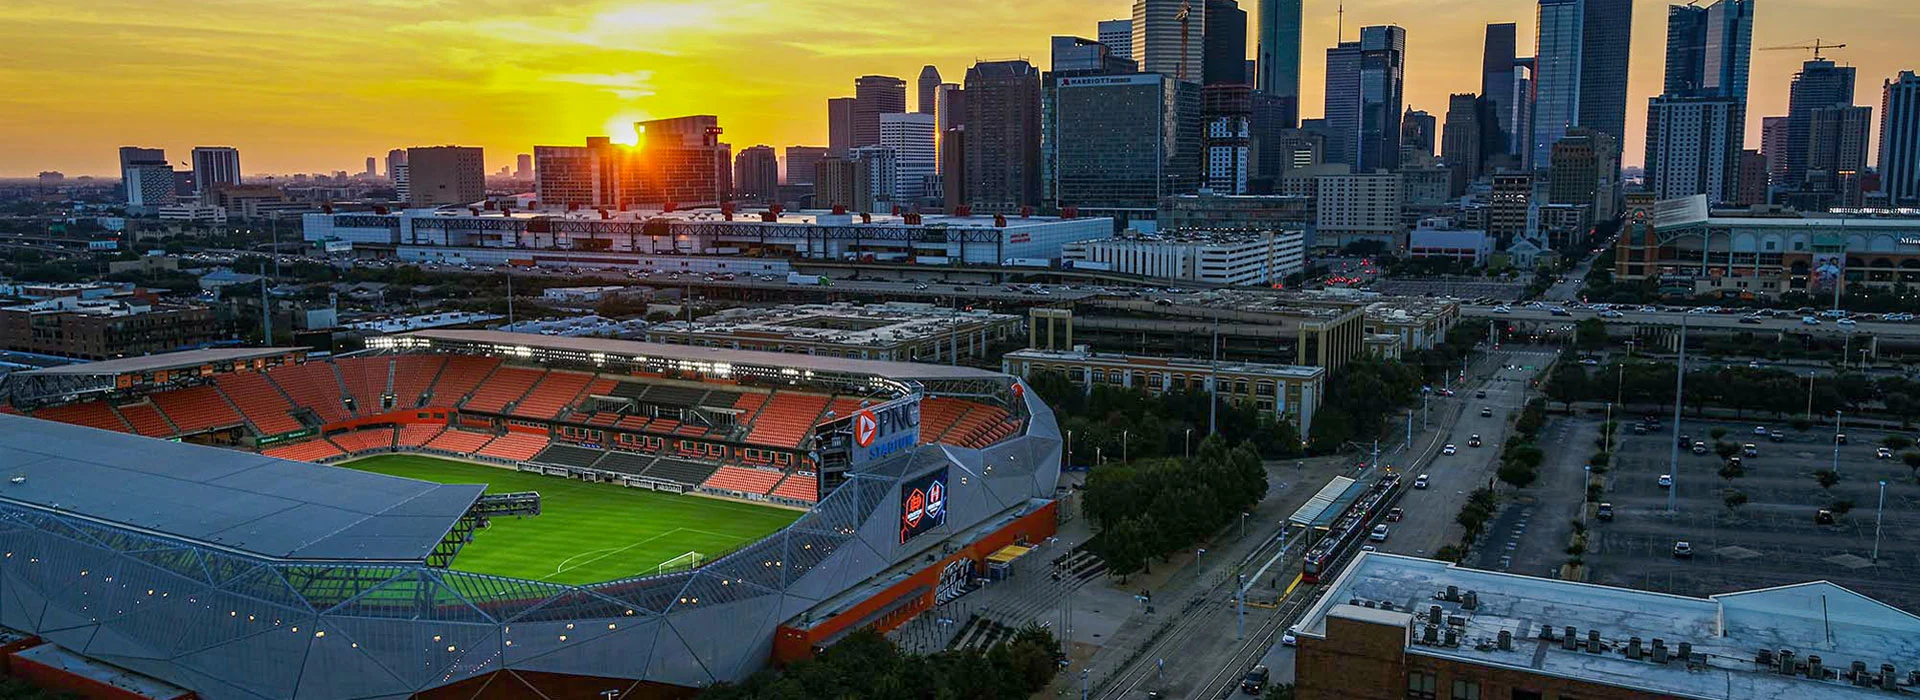 A photo of Shell Energy Stadium with the Houston skyline in the background